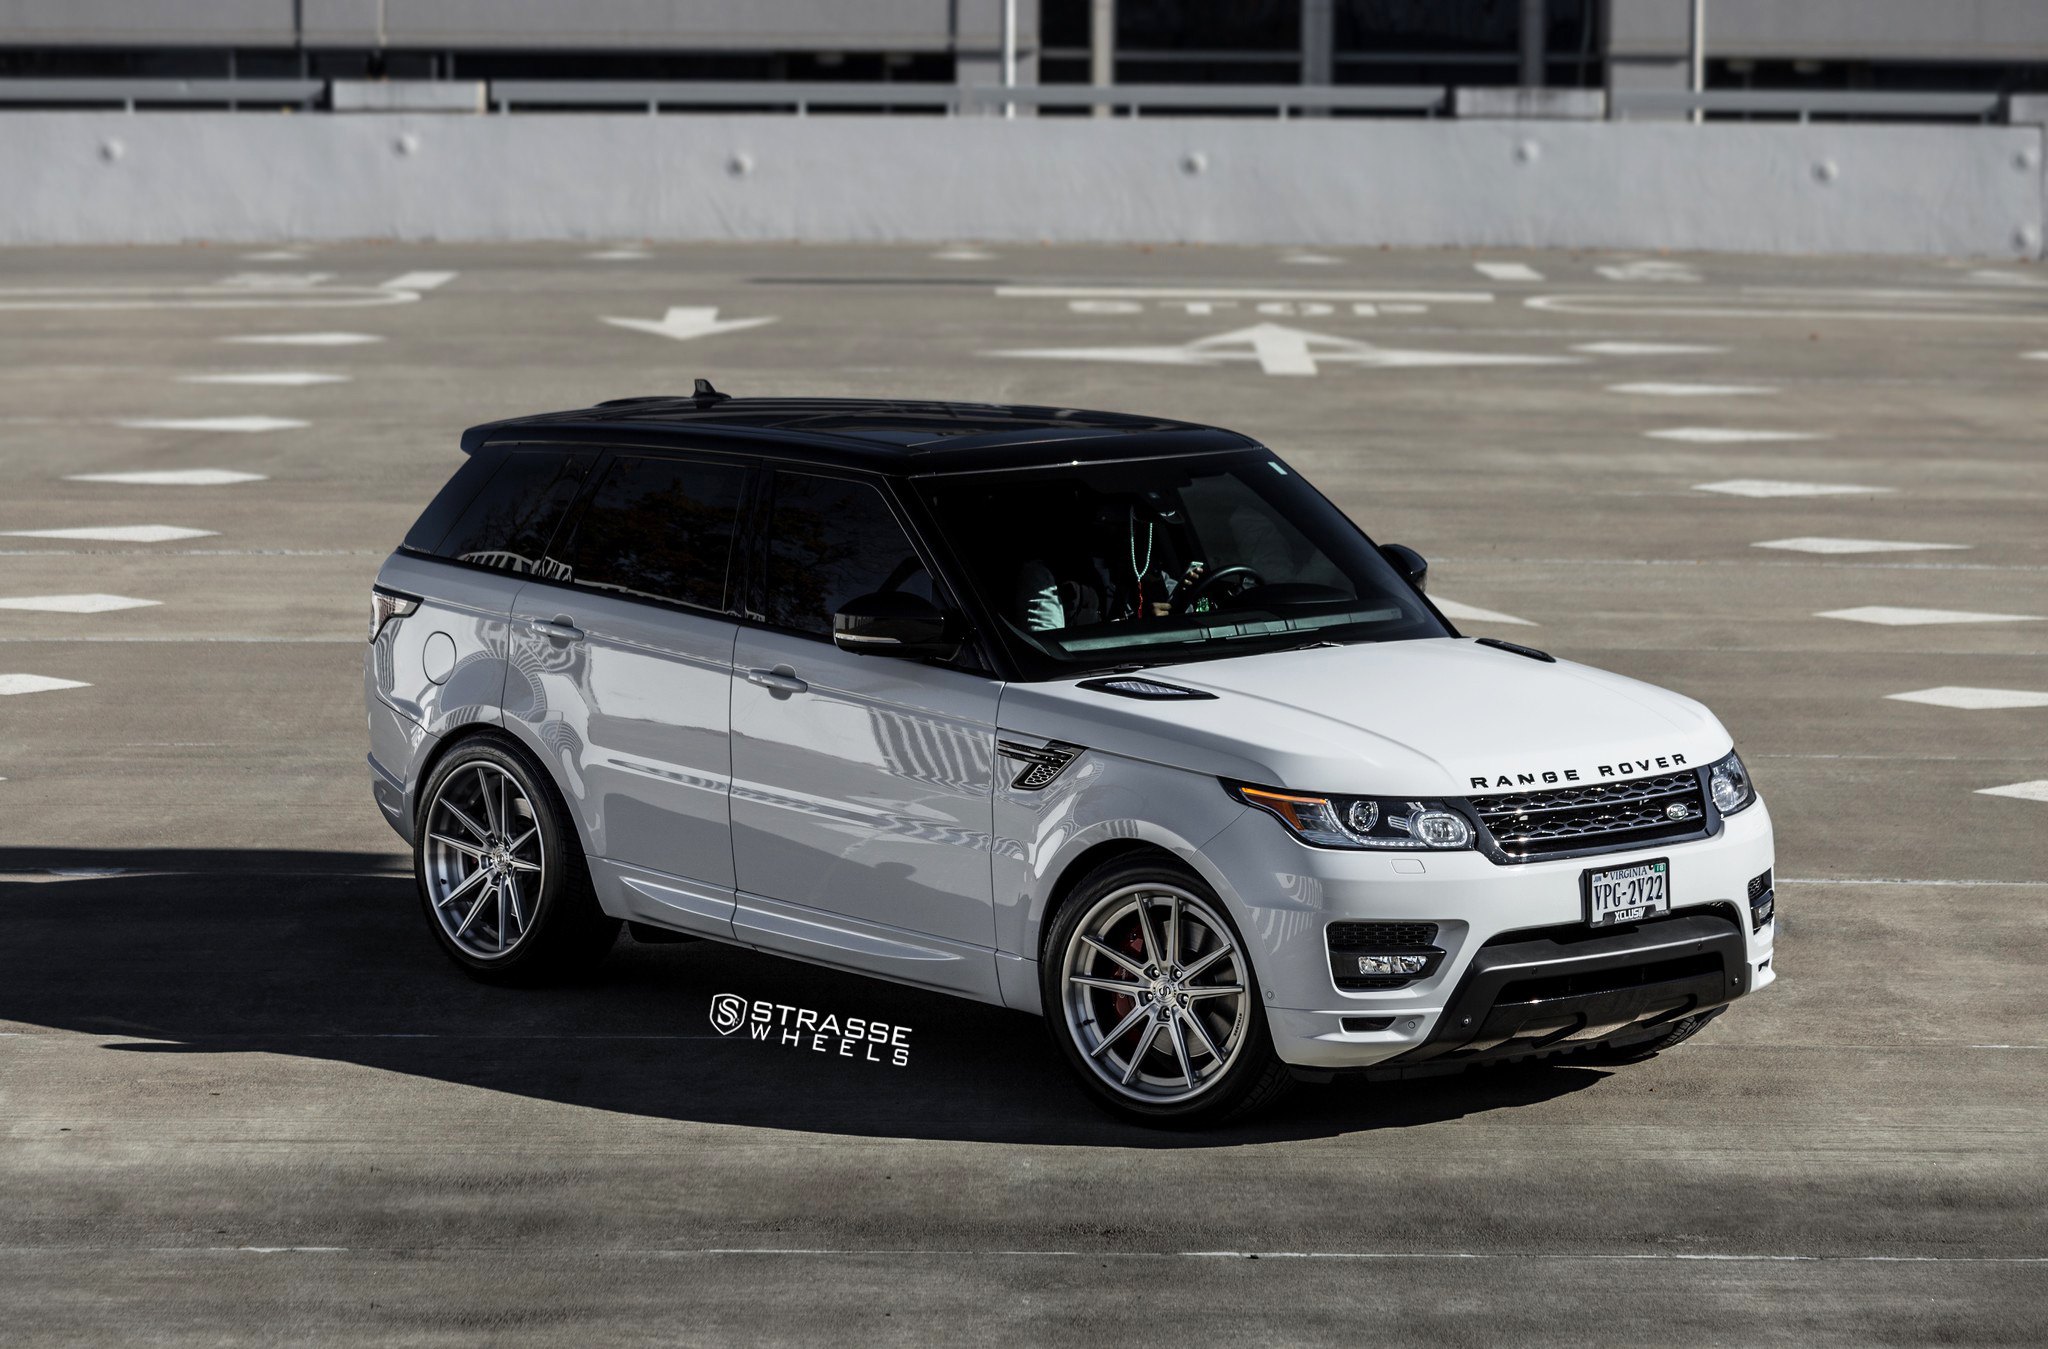 White Range Rover Sport with Custom Bumper Guard - Photo by Strasse Forged